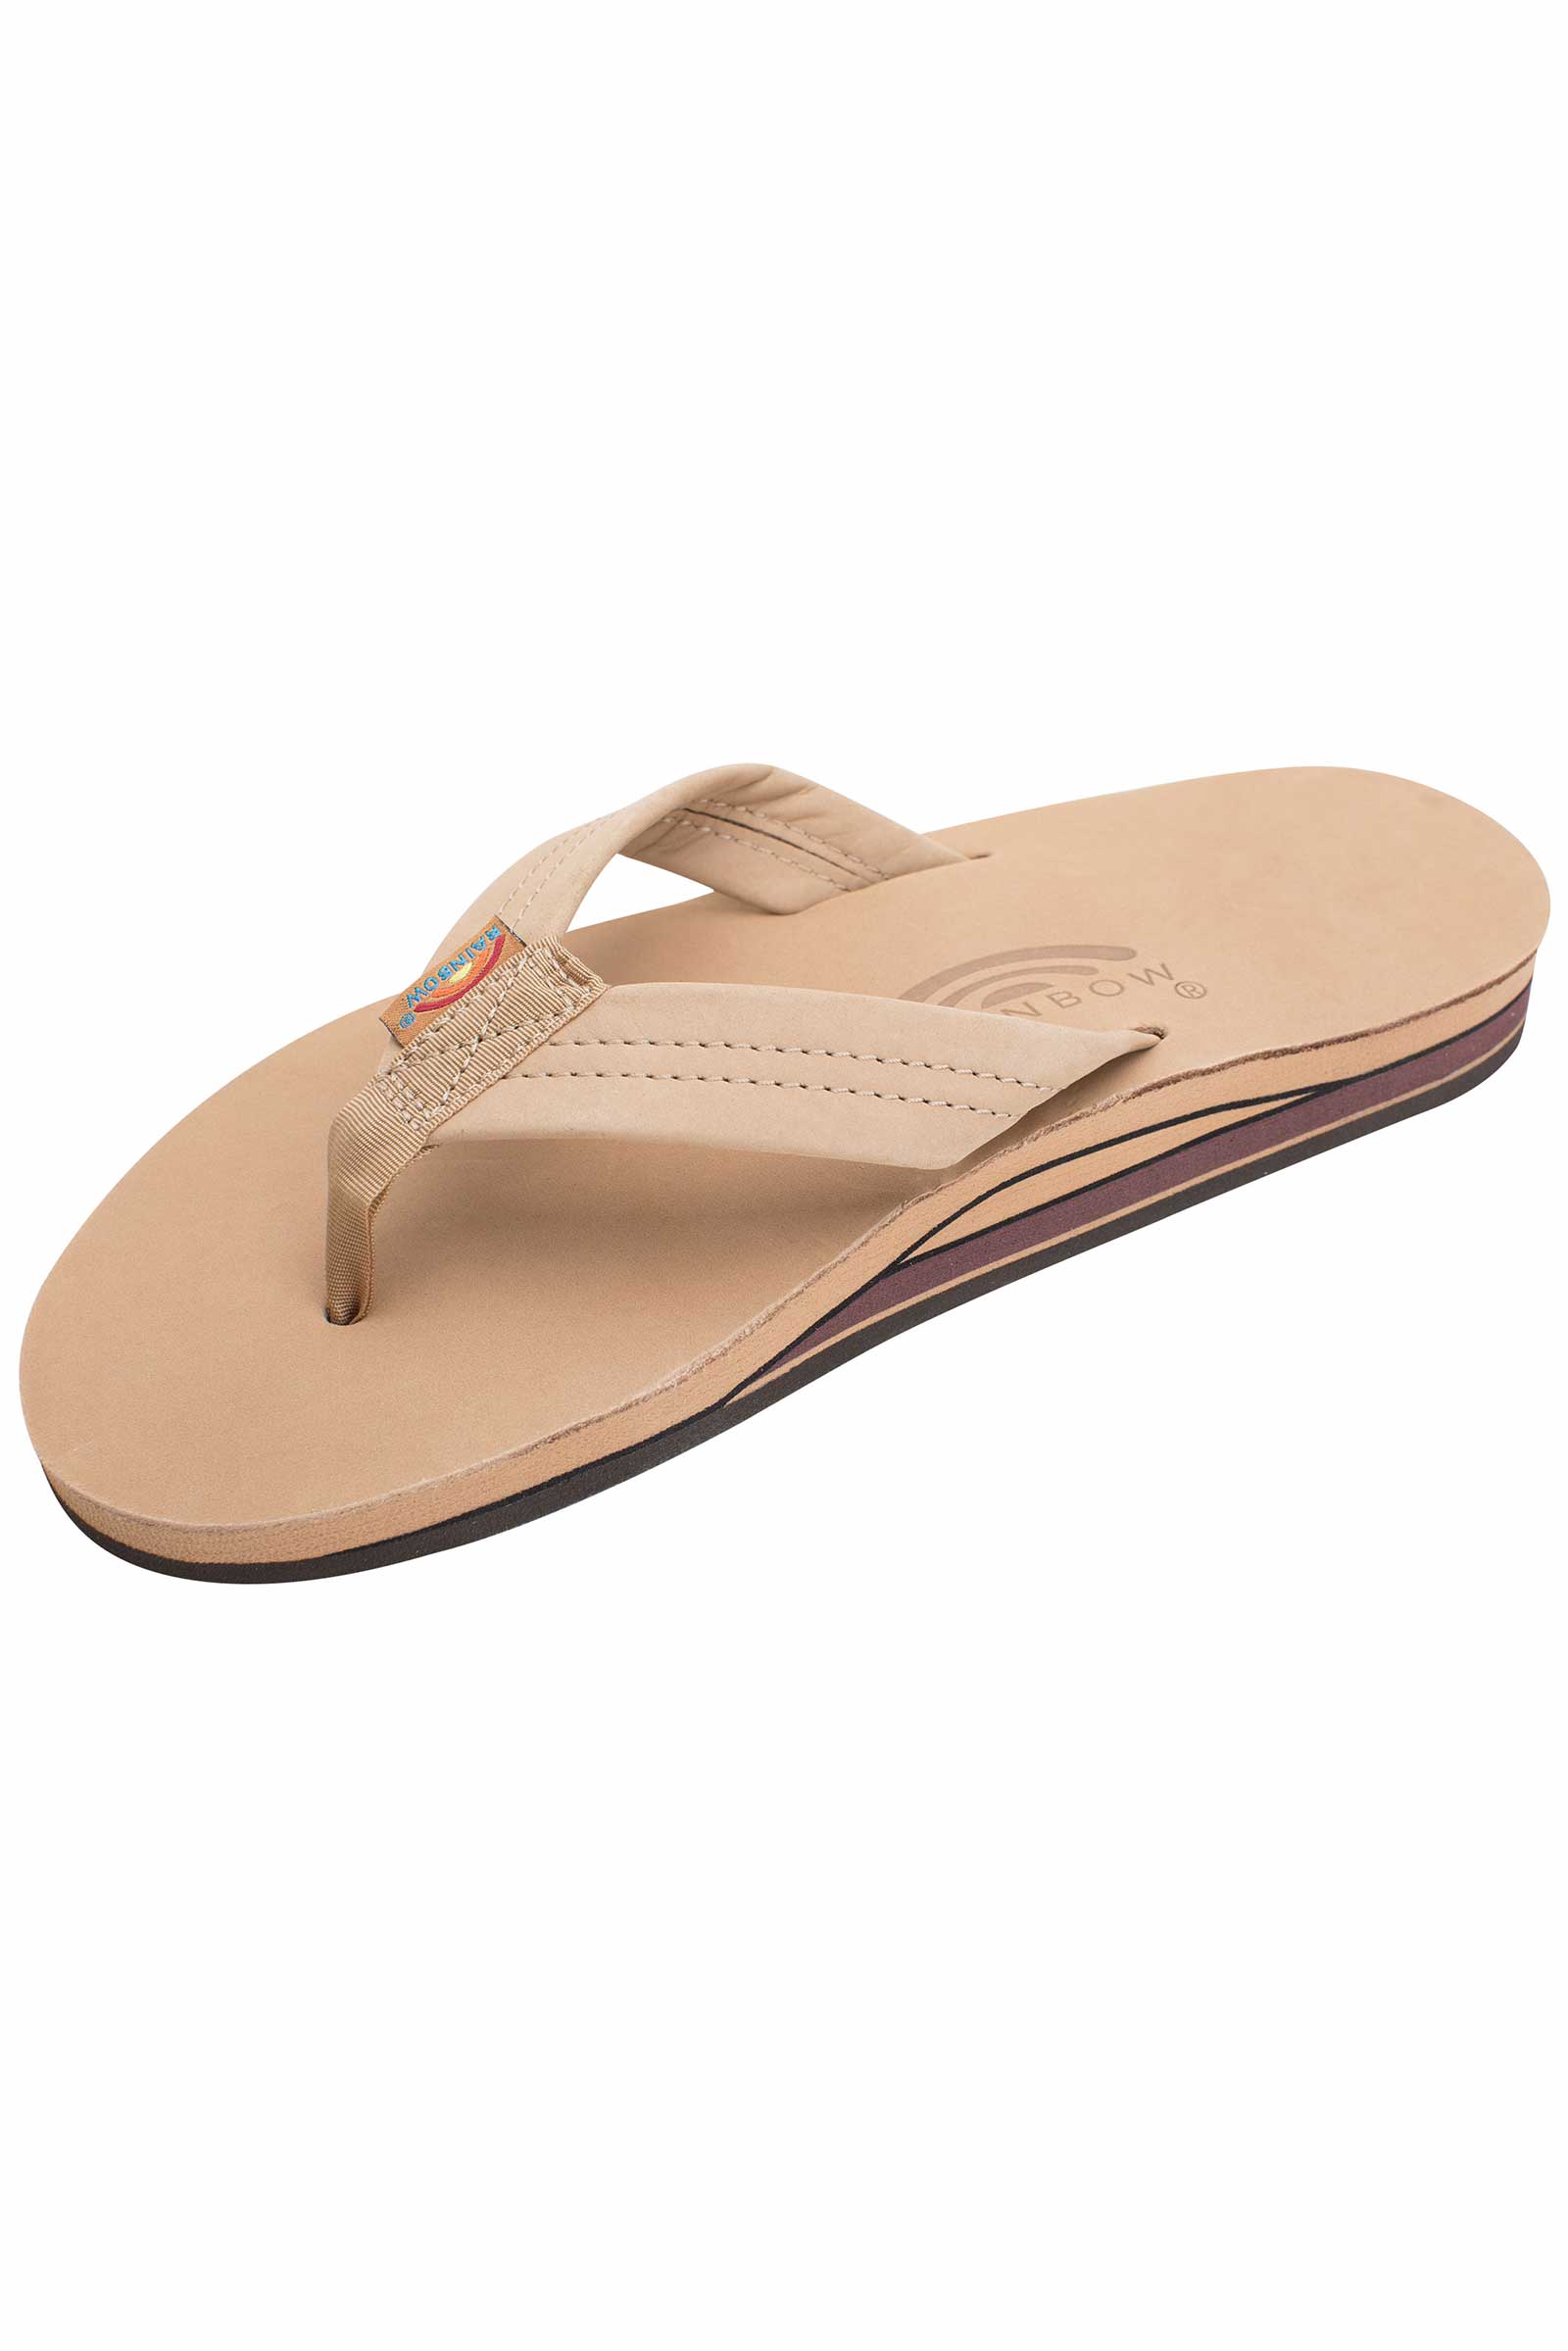 Rainbow Sandals for Sore Feet - HubPages